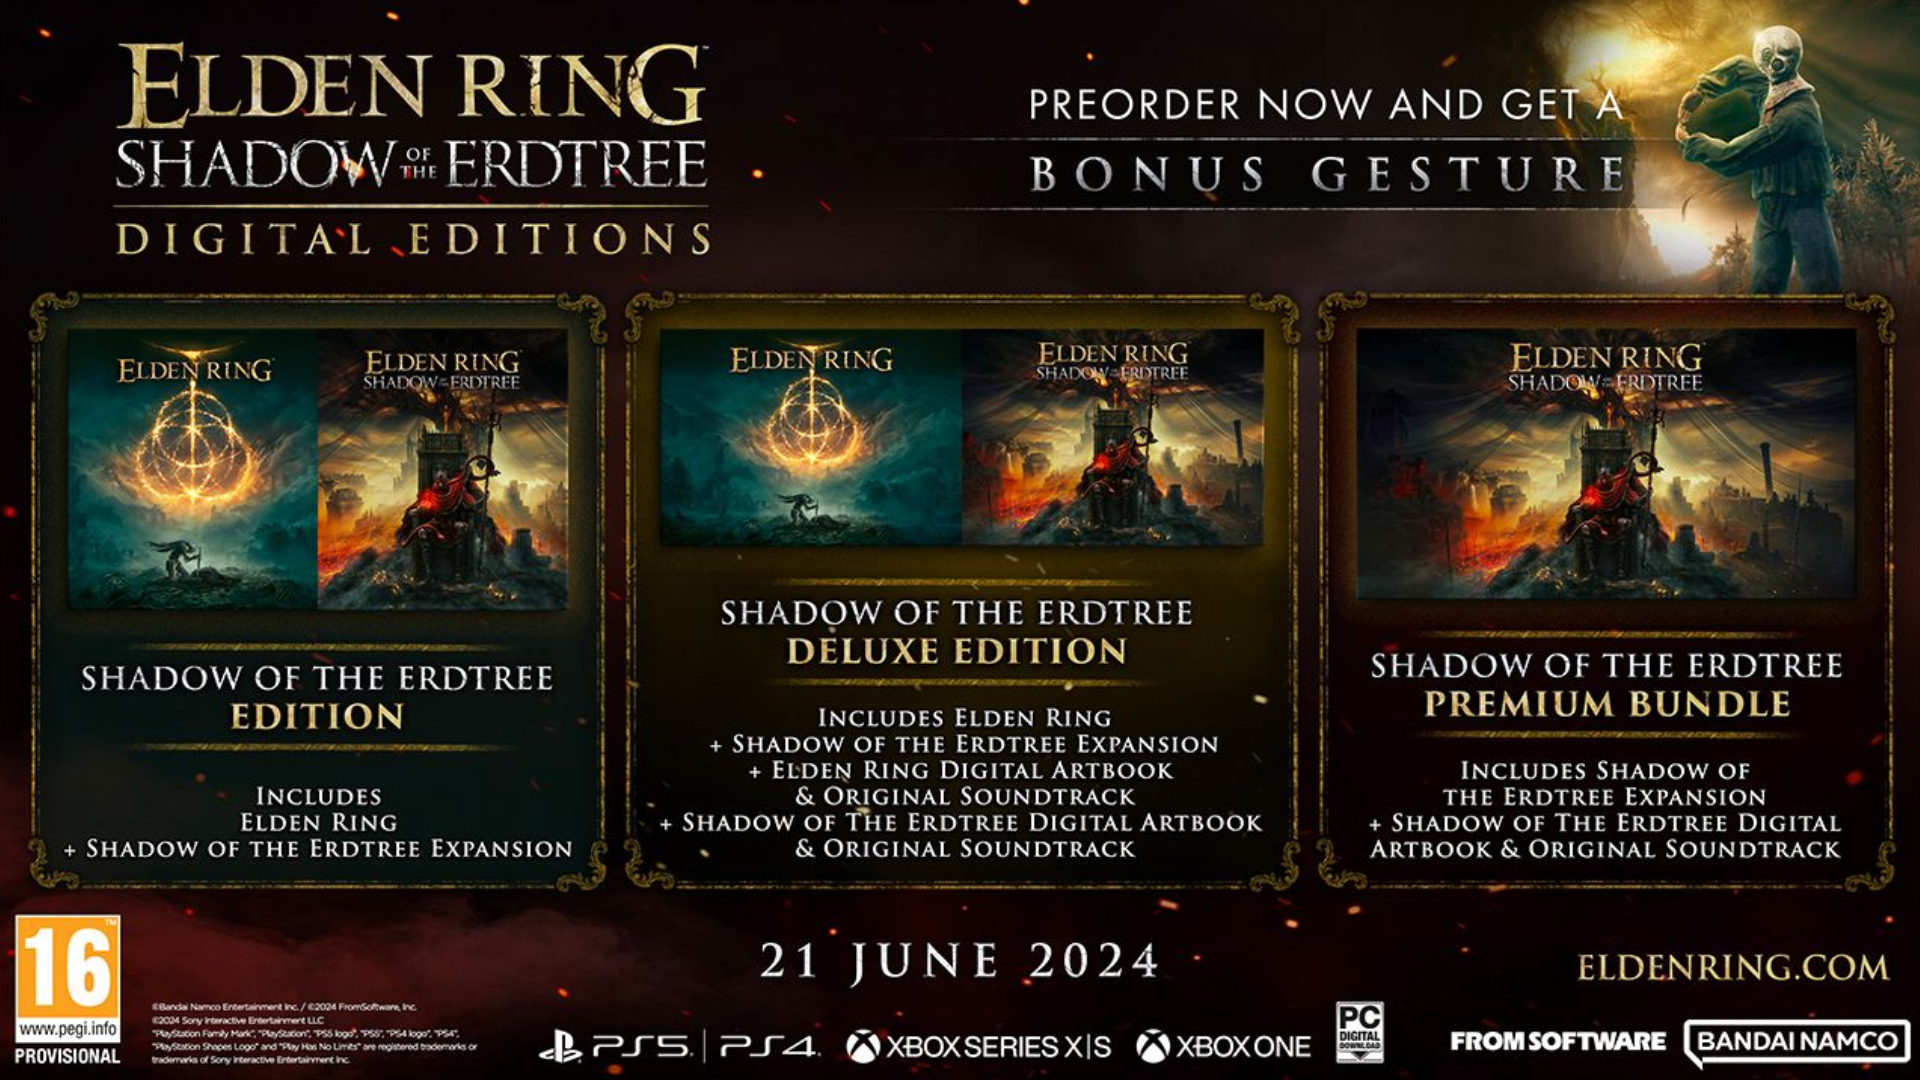 The three main editions of Shadow of the Erdtree